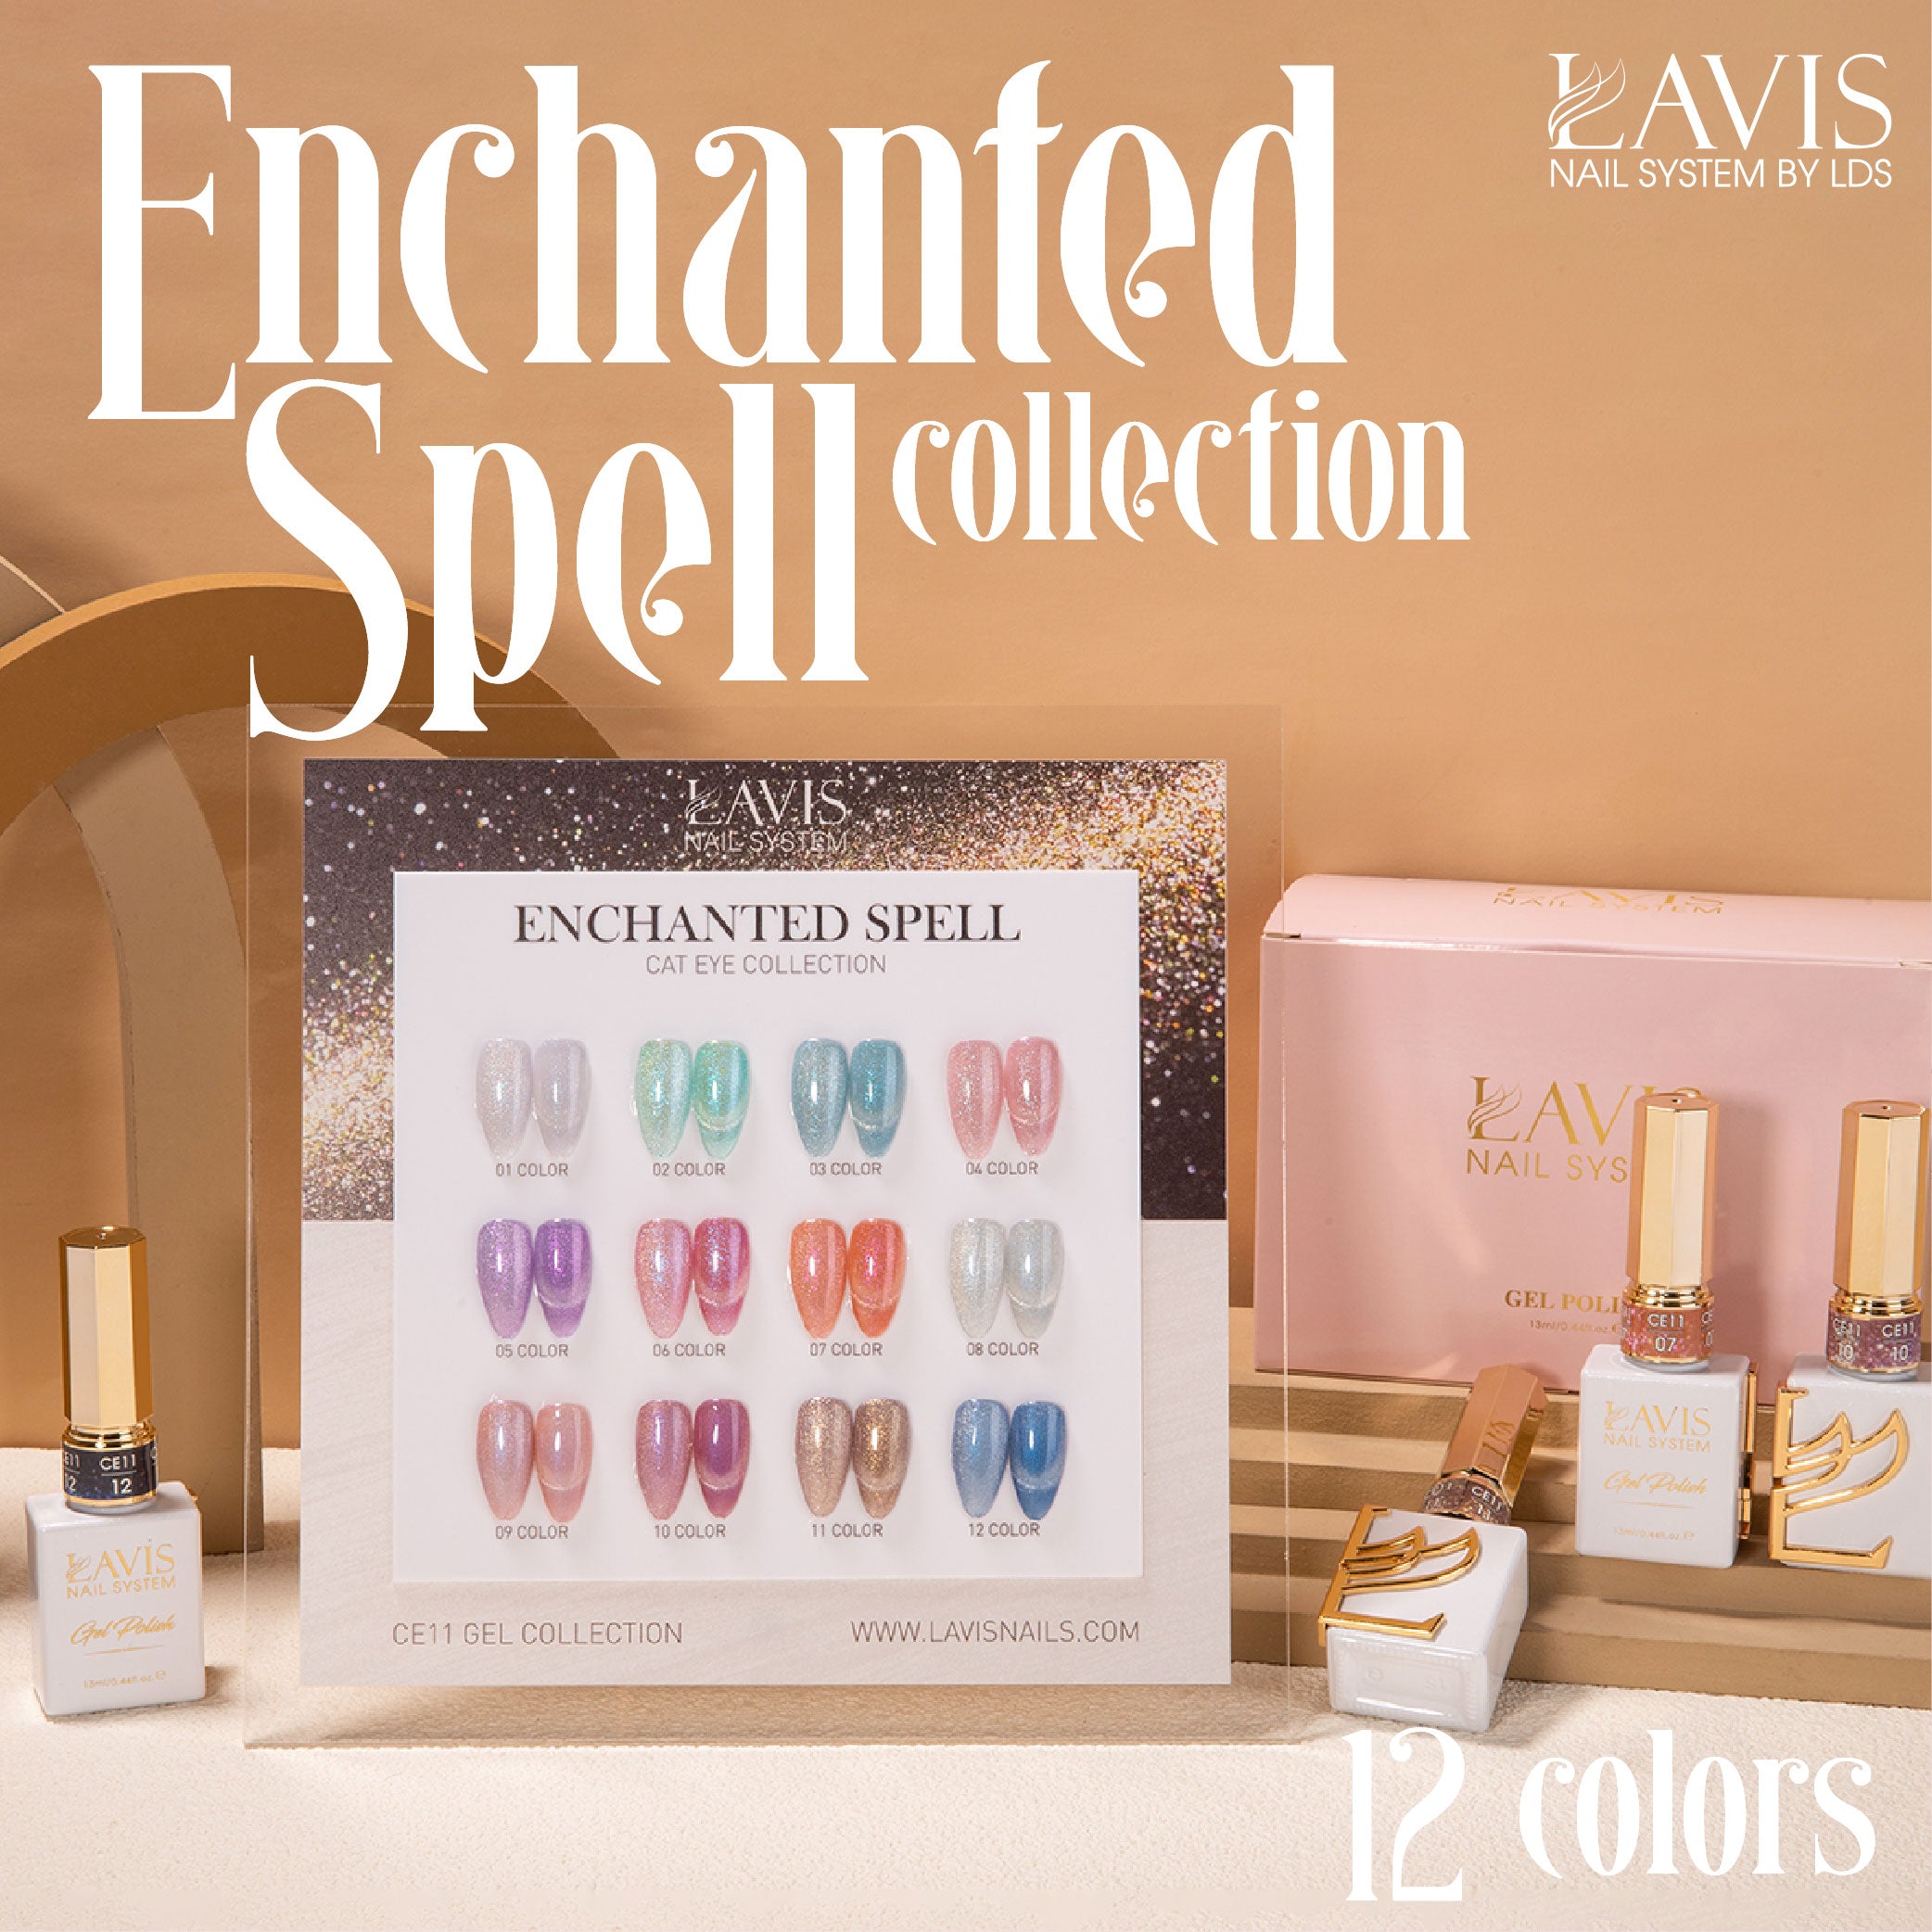 LAVIS Cat Eyes CE11 - 06 - Gel Polish 0.5 oz - Enchanted Spell Collection